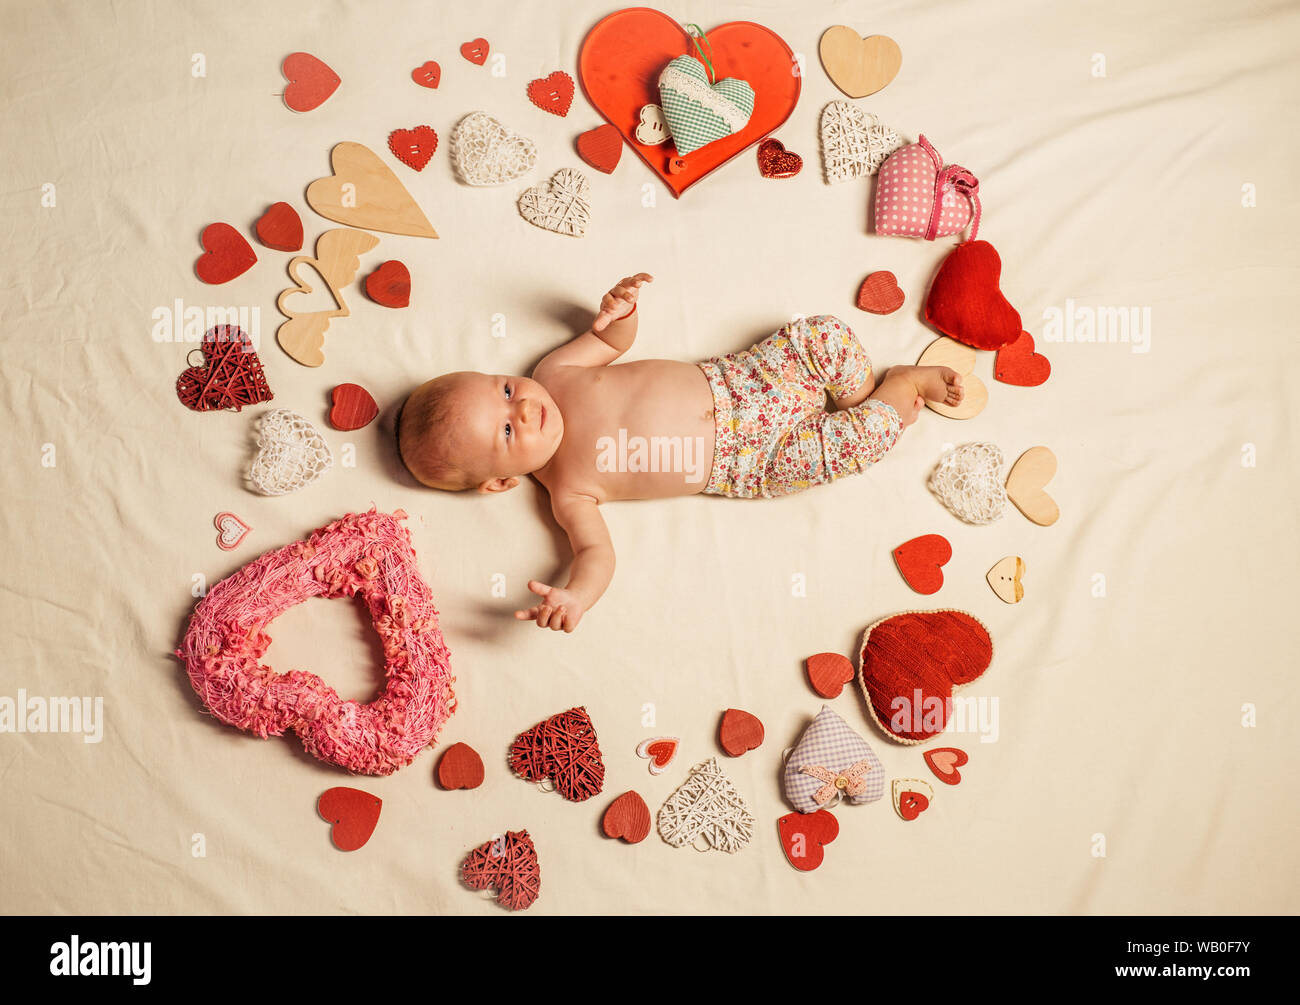 Love. Childhood happiness.Valentines day. Small girl among red hearts. Sweet little baby. New life and birth. Family. Child care. Love and trust Stock Photo